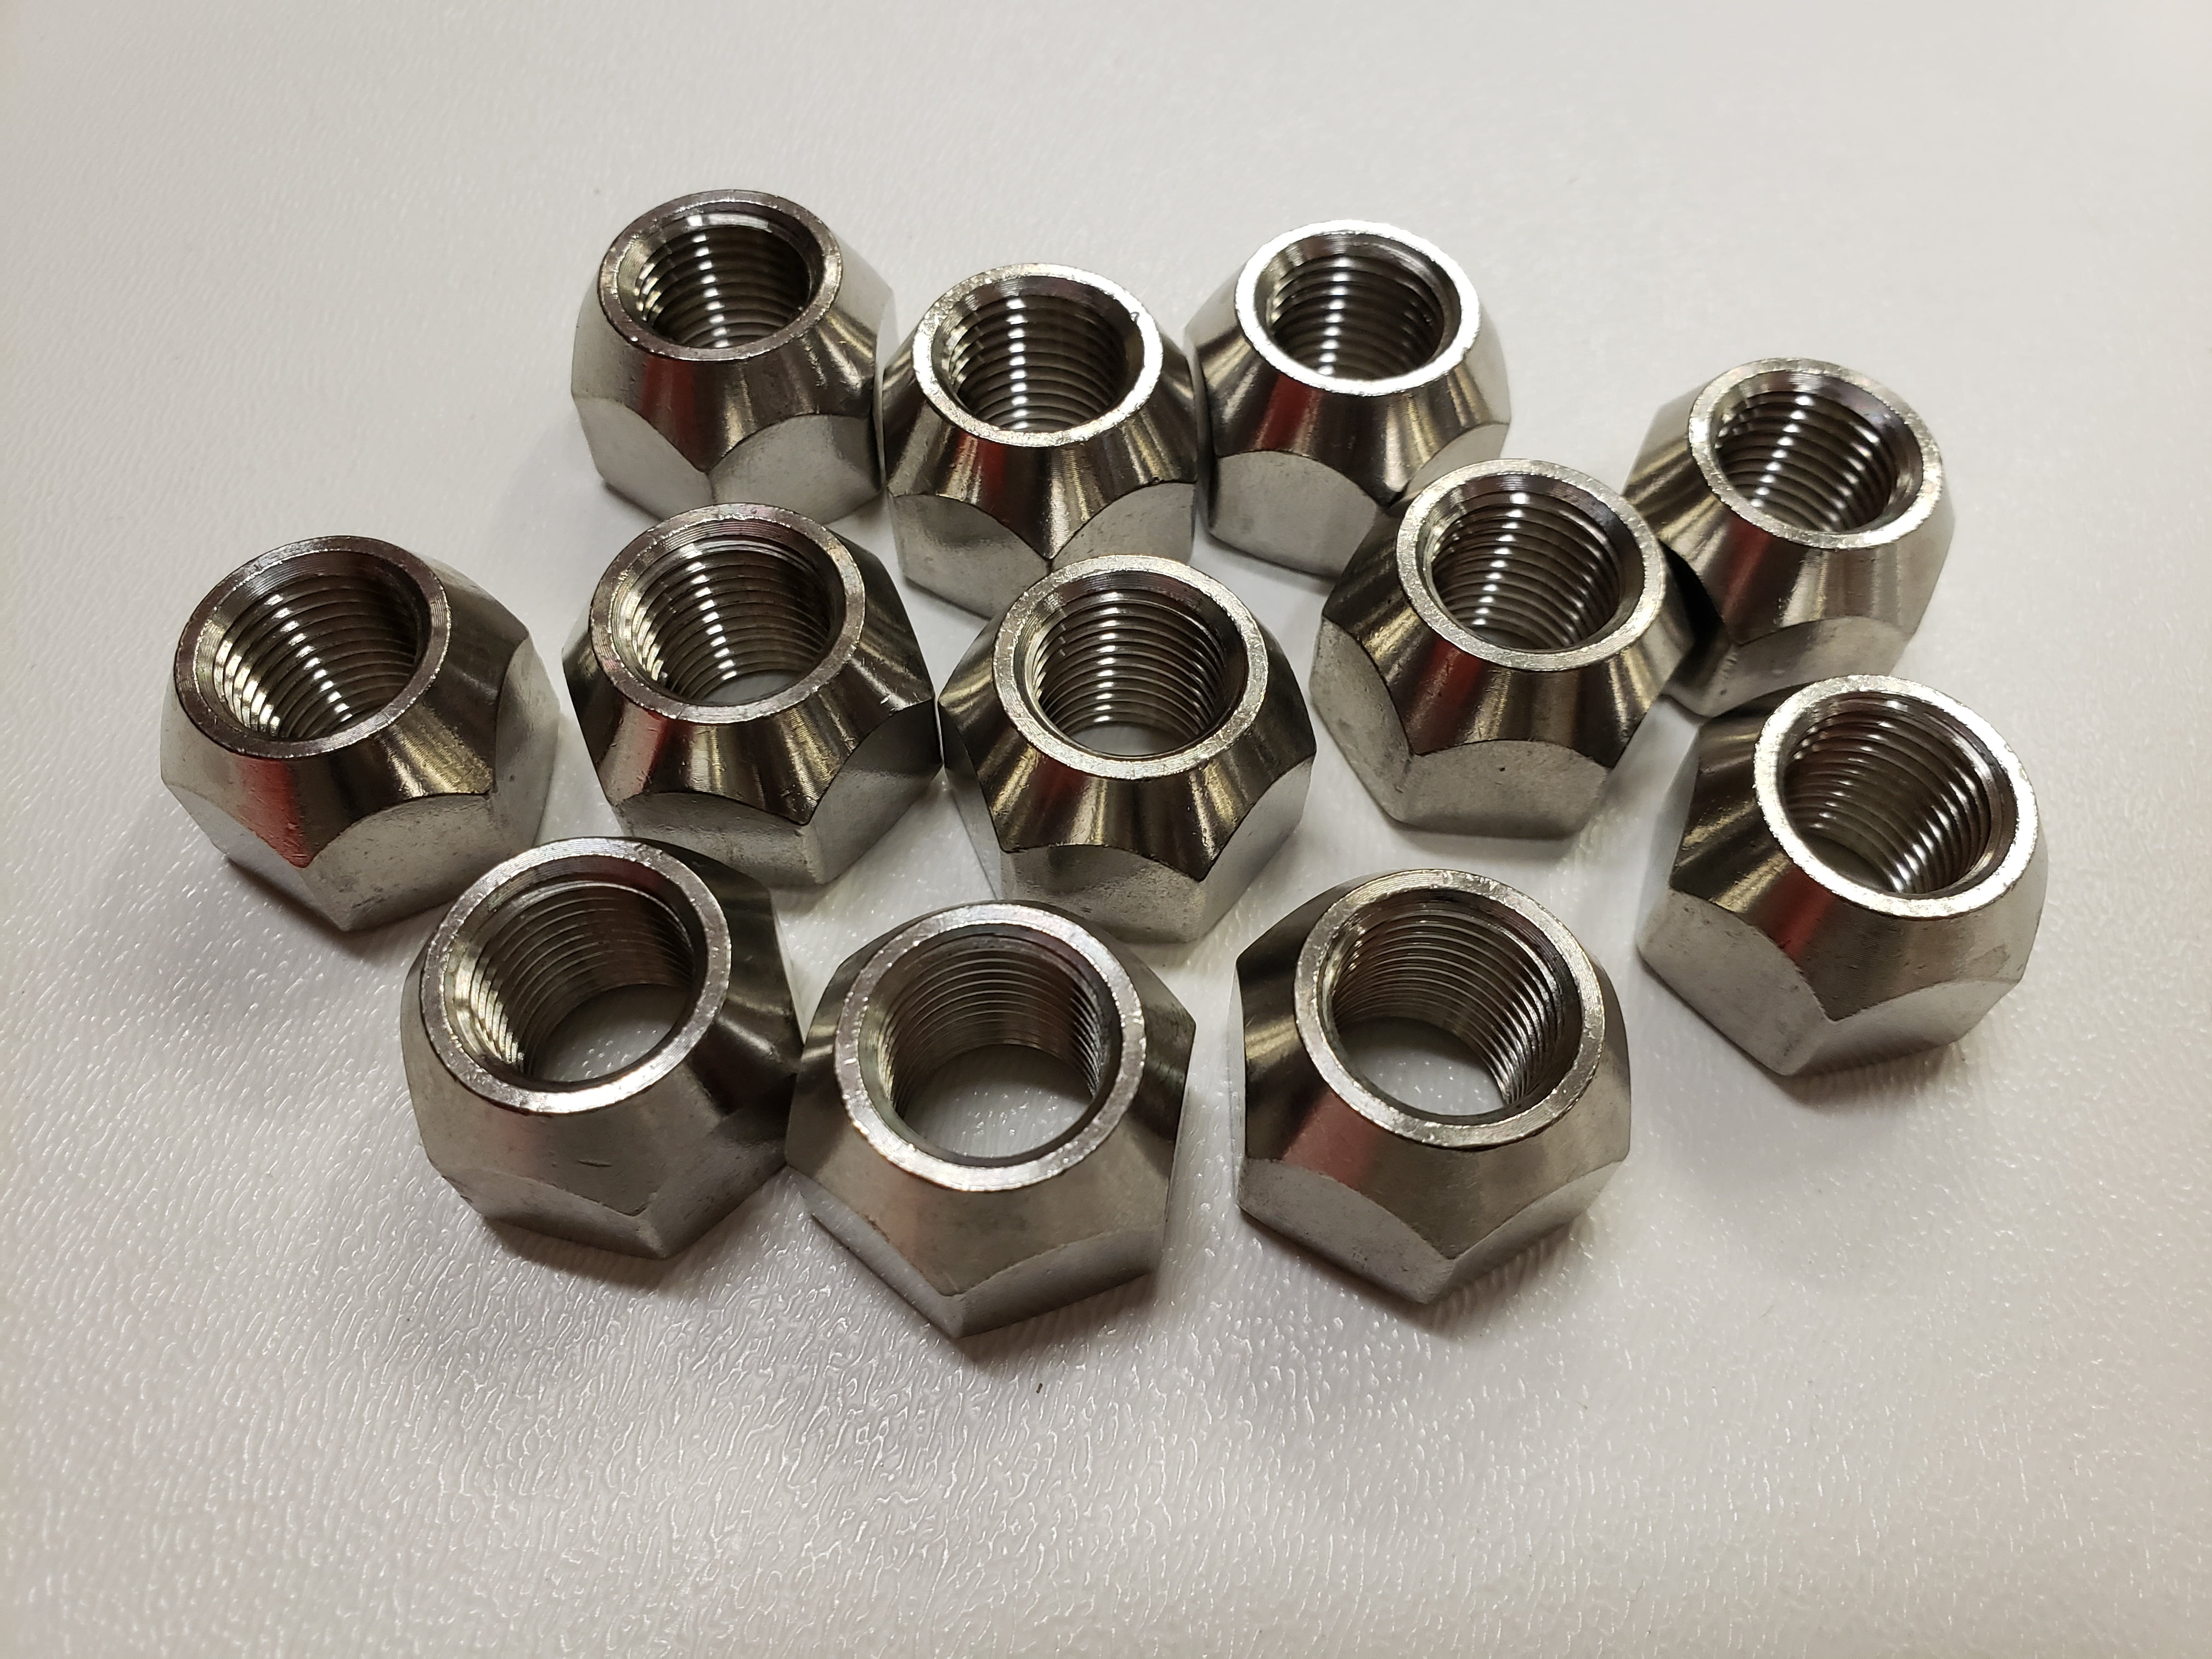 Twelve (12) Pack Open 304 Stainless Steel 1/2-20 Lug Nuts For Trailer Stainless Steel Lug Nuts 1 2 X 20